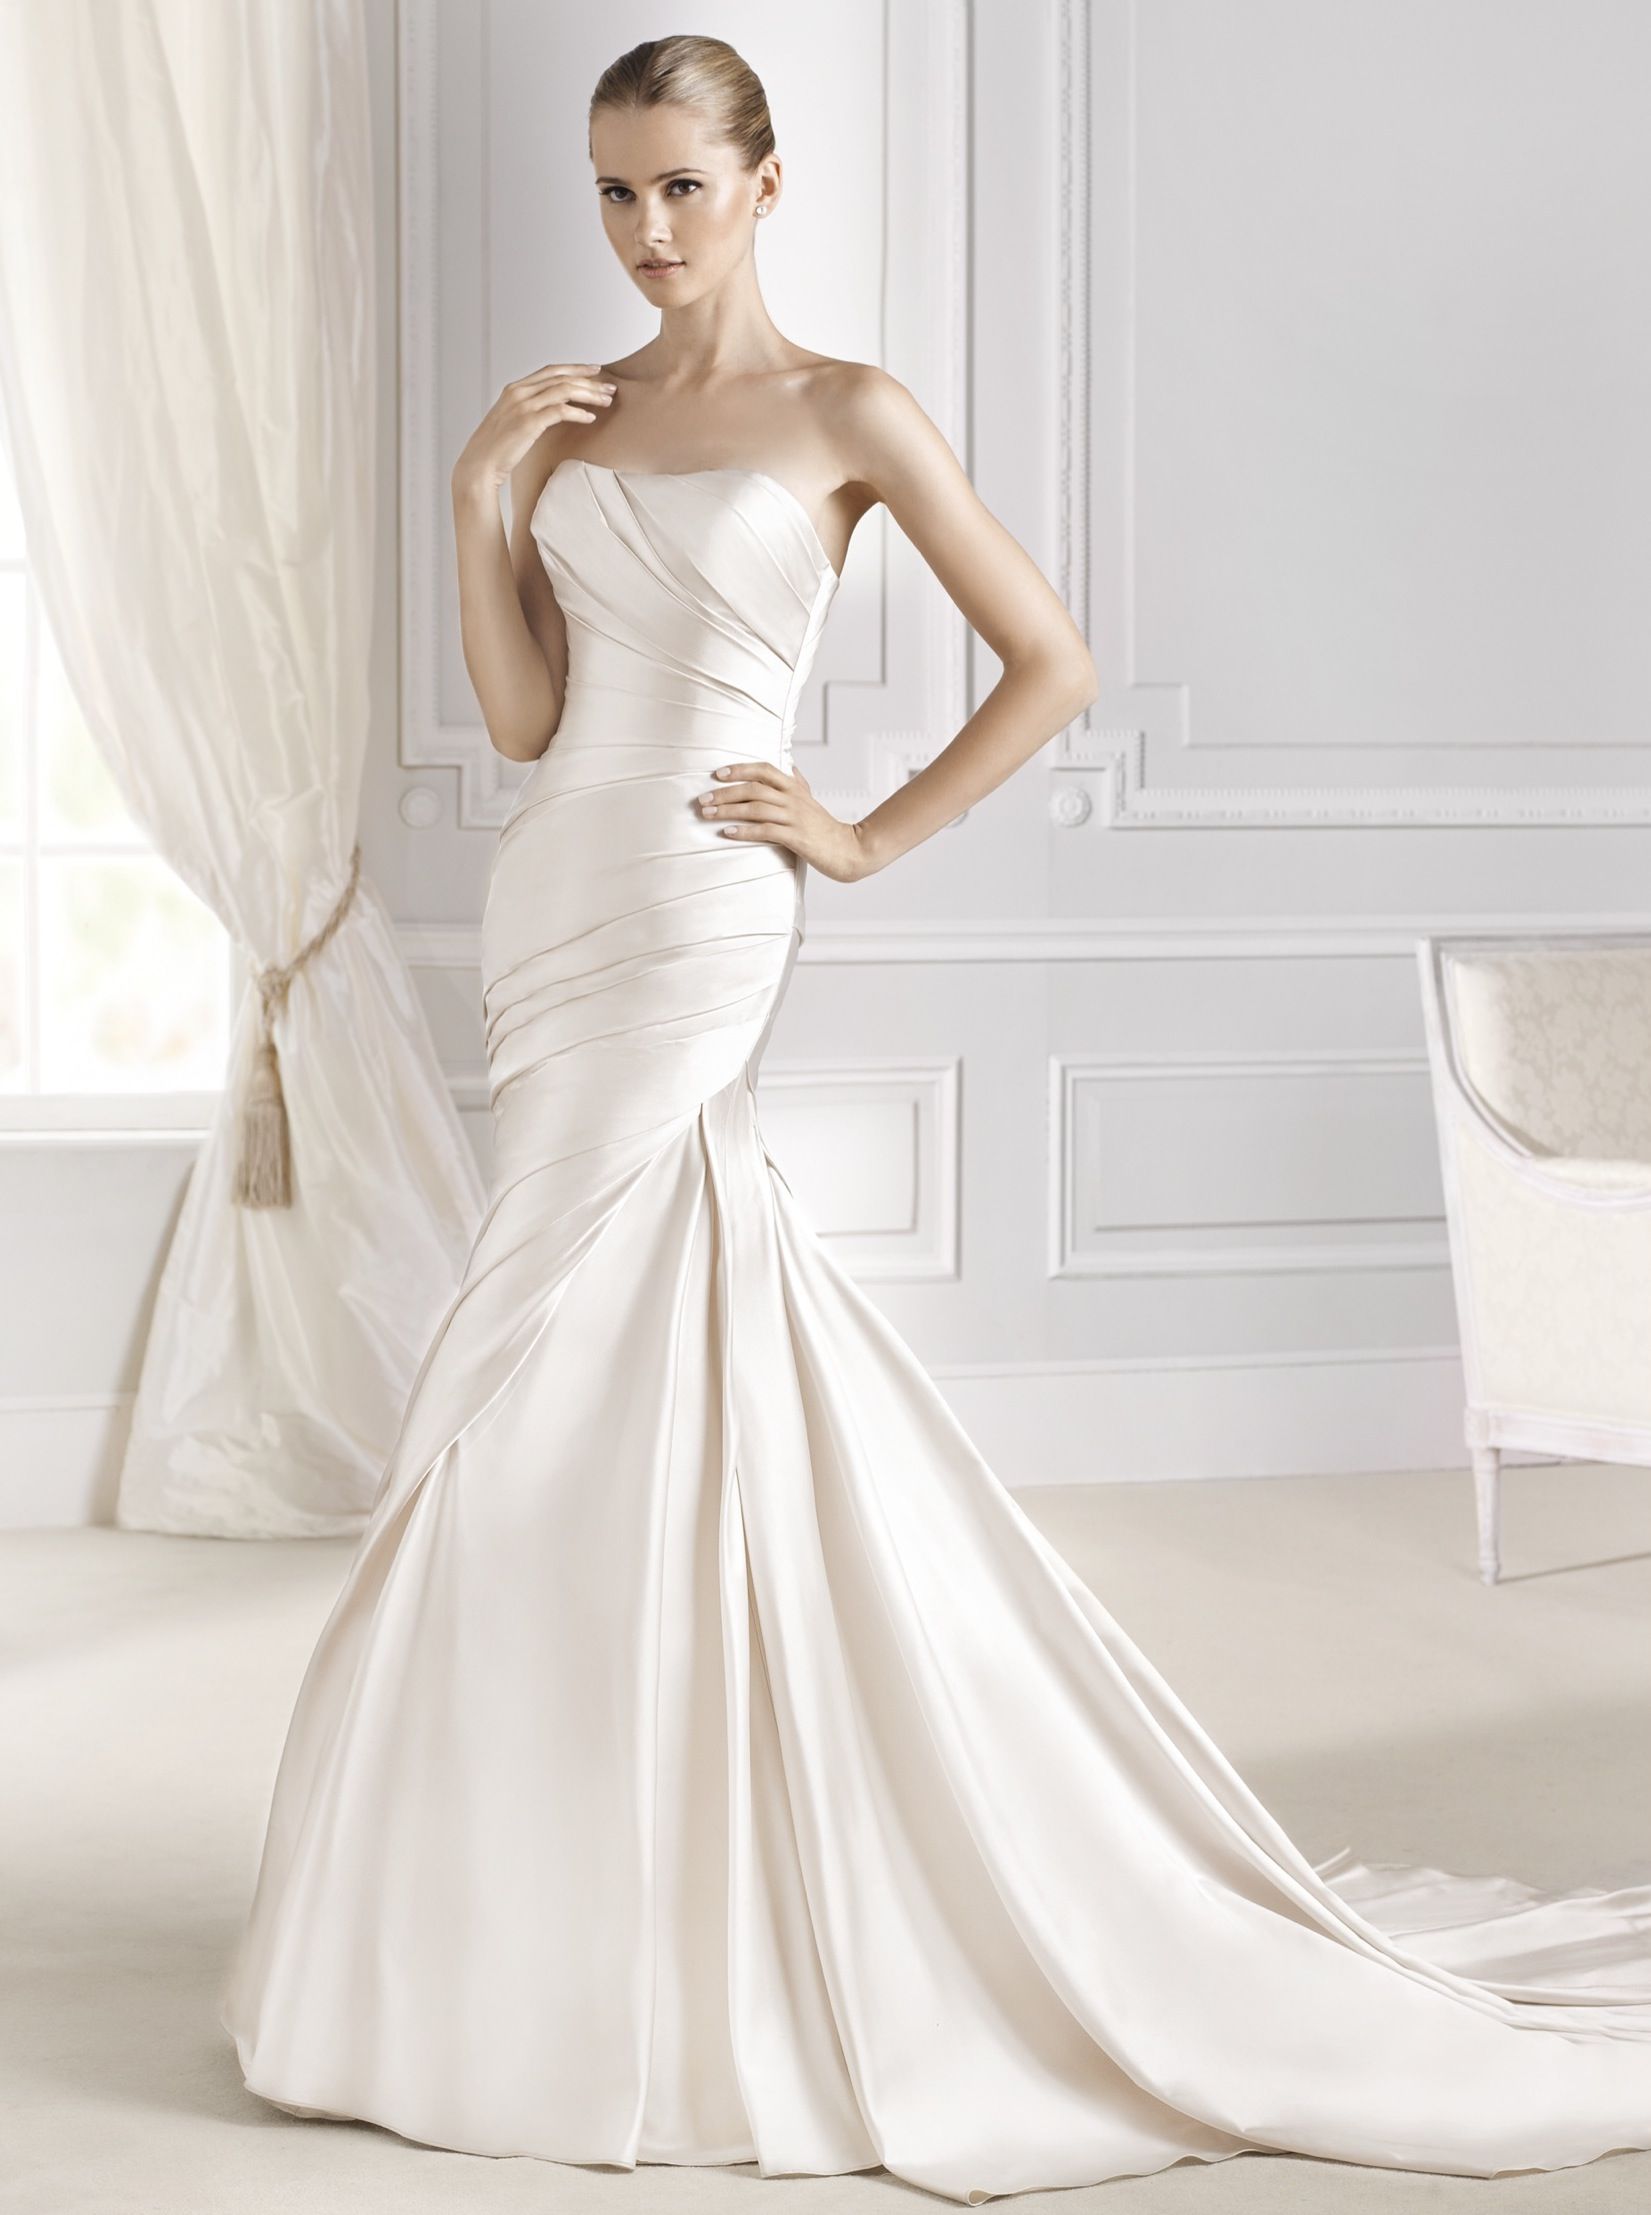 Model wearing a white gown 49